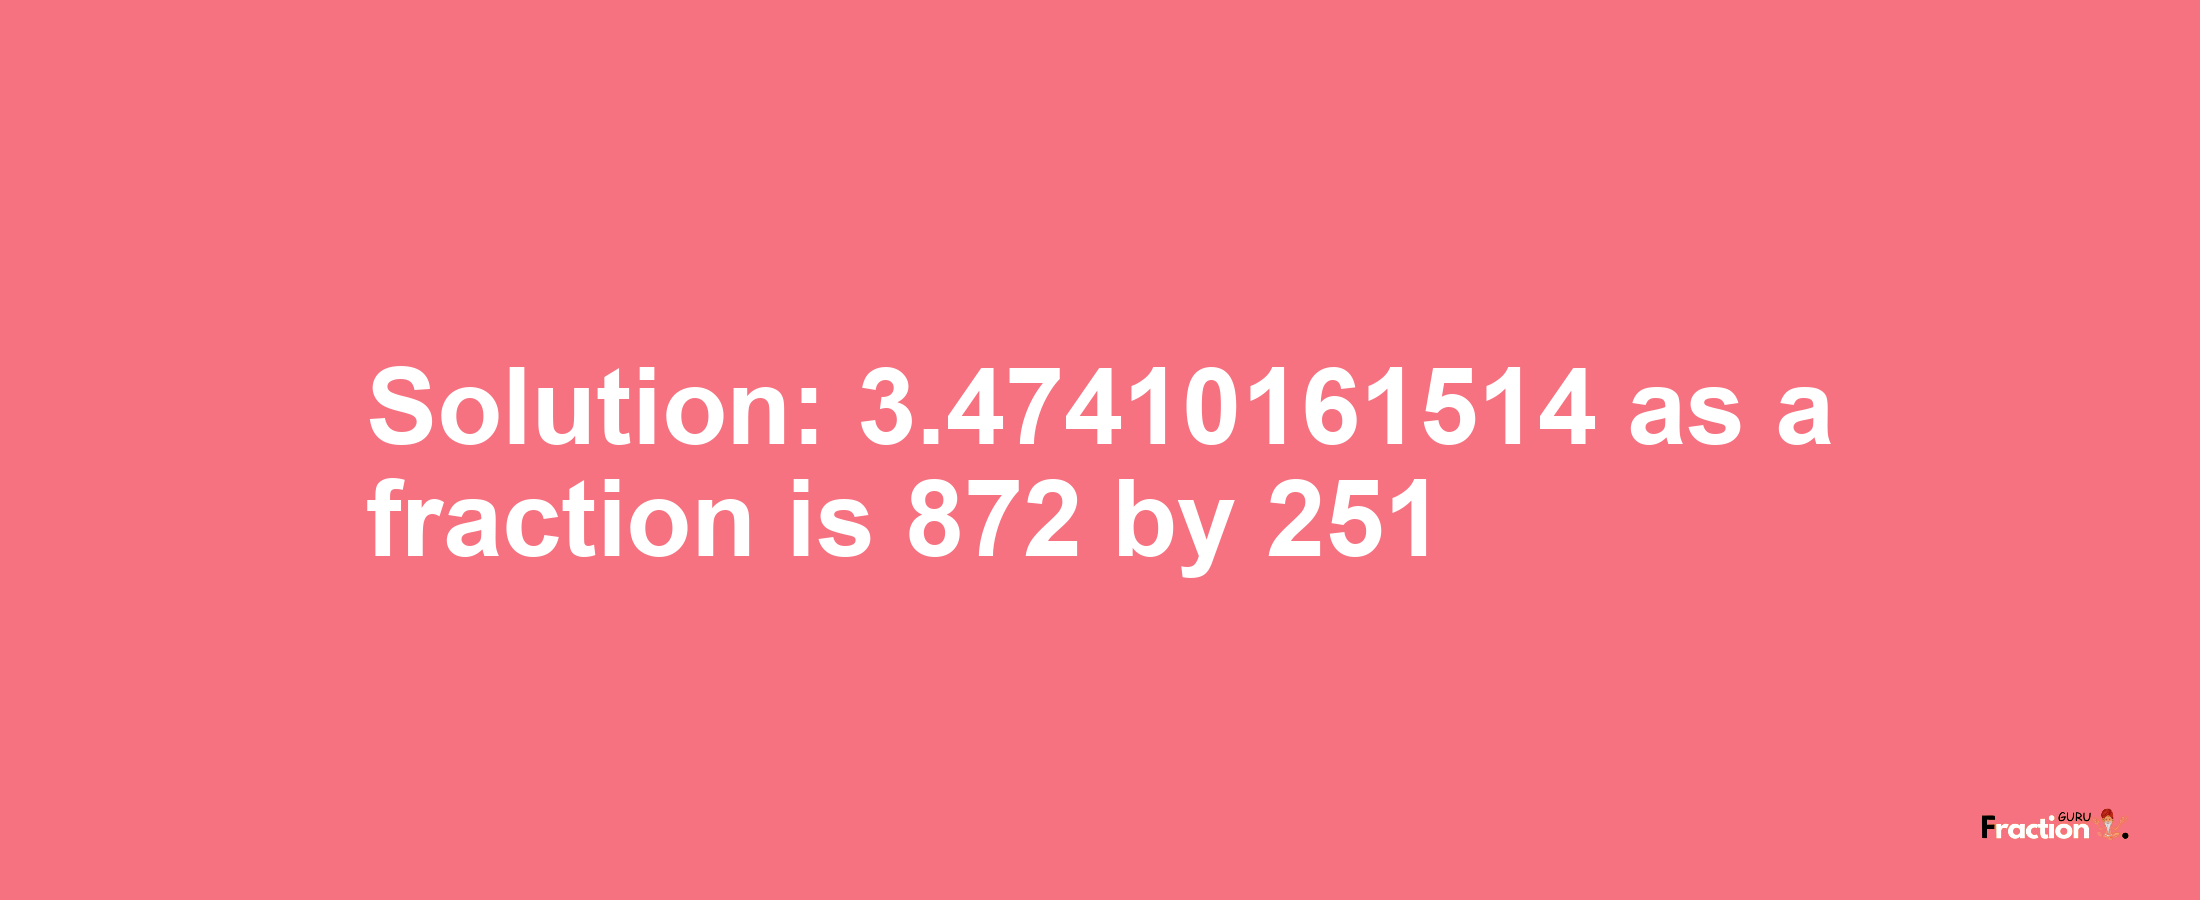 Solution:3.47410161514 as a fraction is 872/251